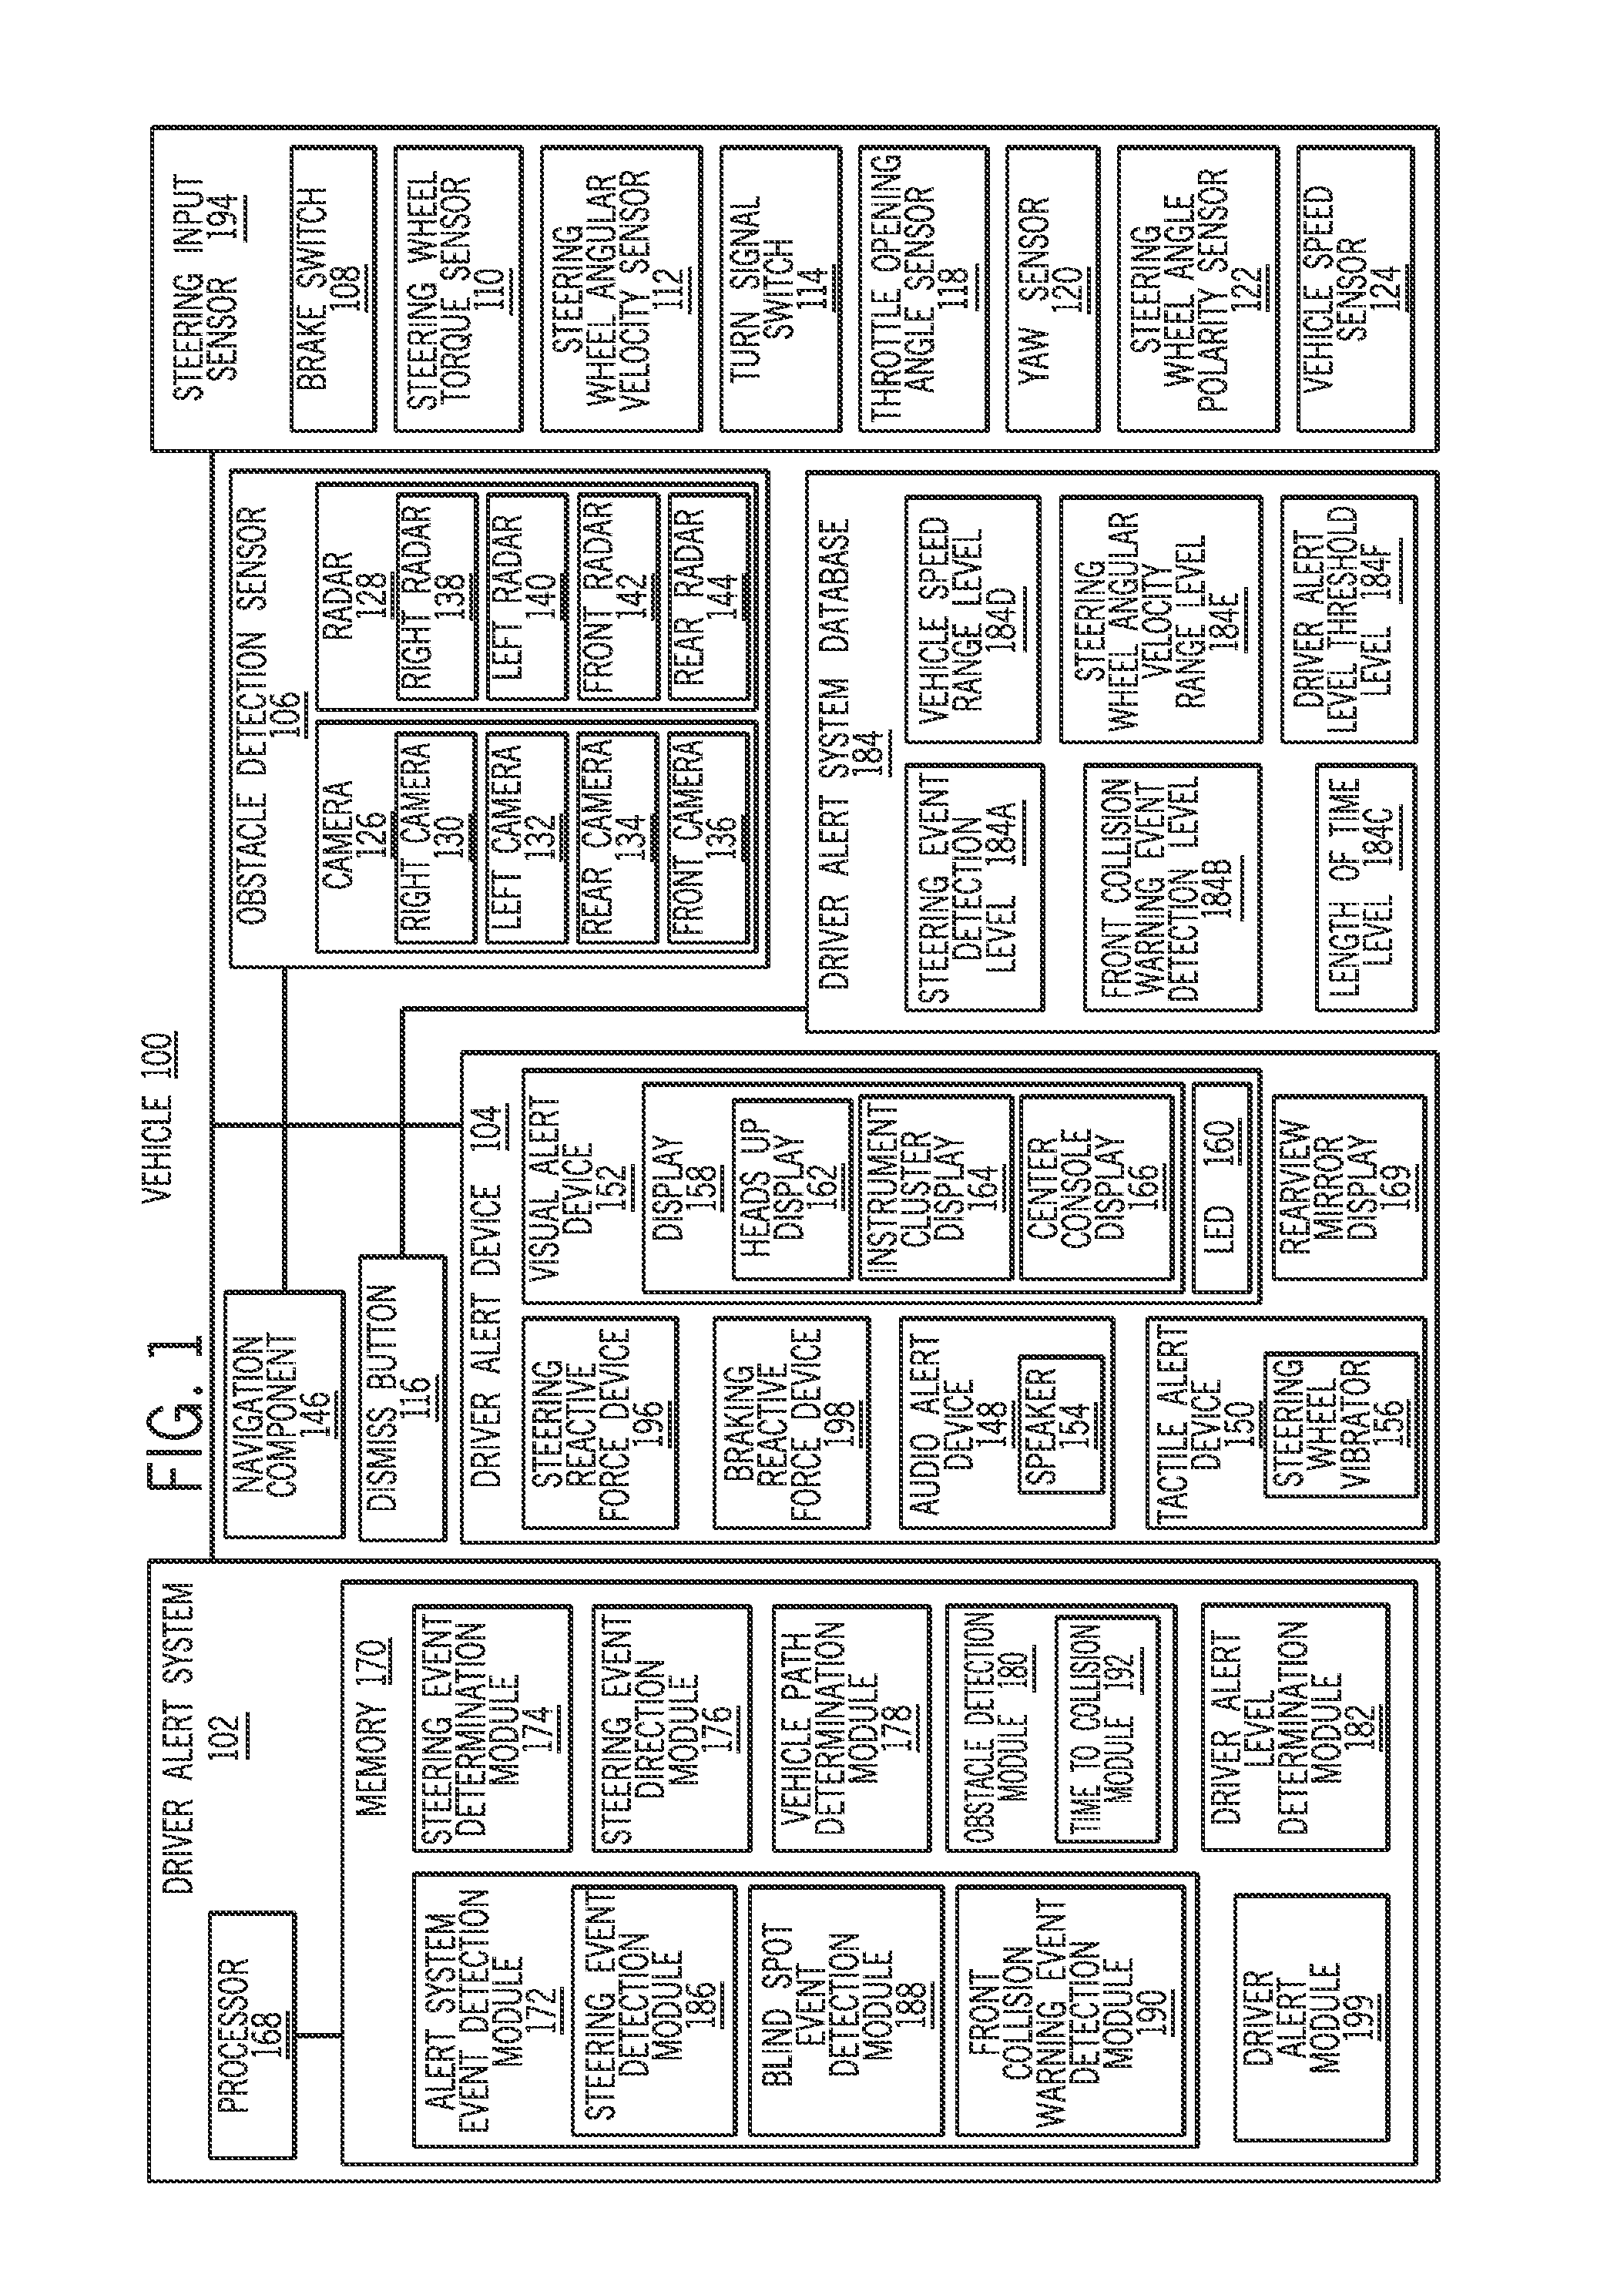 Determining a driver alert level for a vehicle alert system and method of use